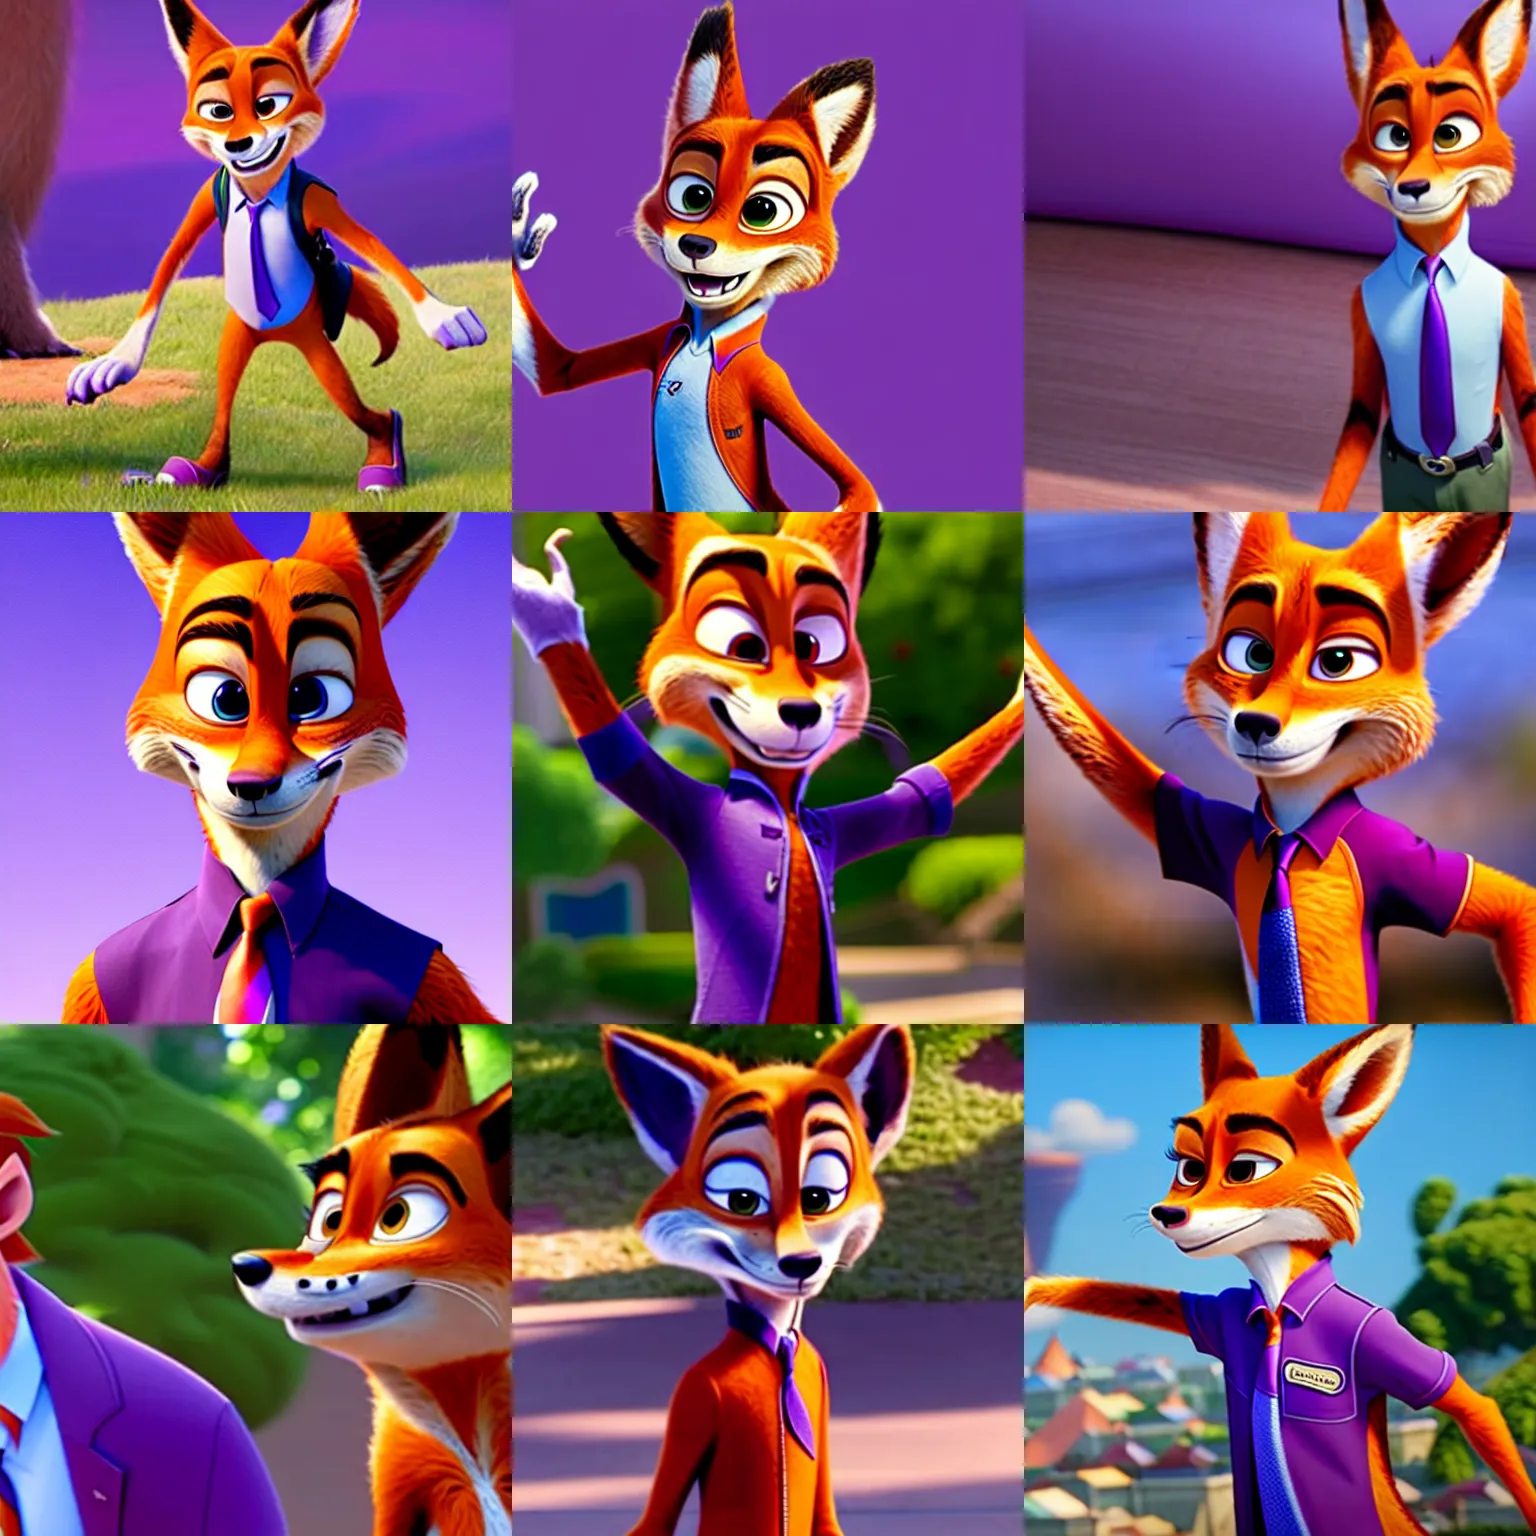 Nick Wilde (from Zootopia) wearing a purple uniform | Stable Diffusion ...